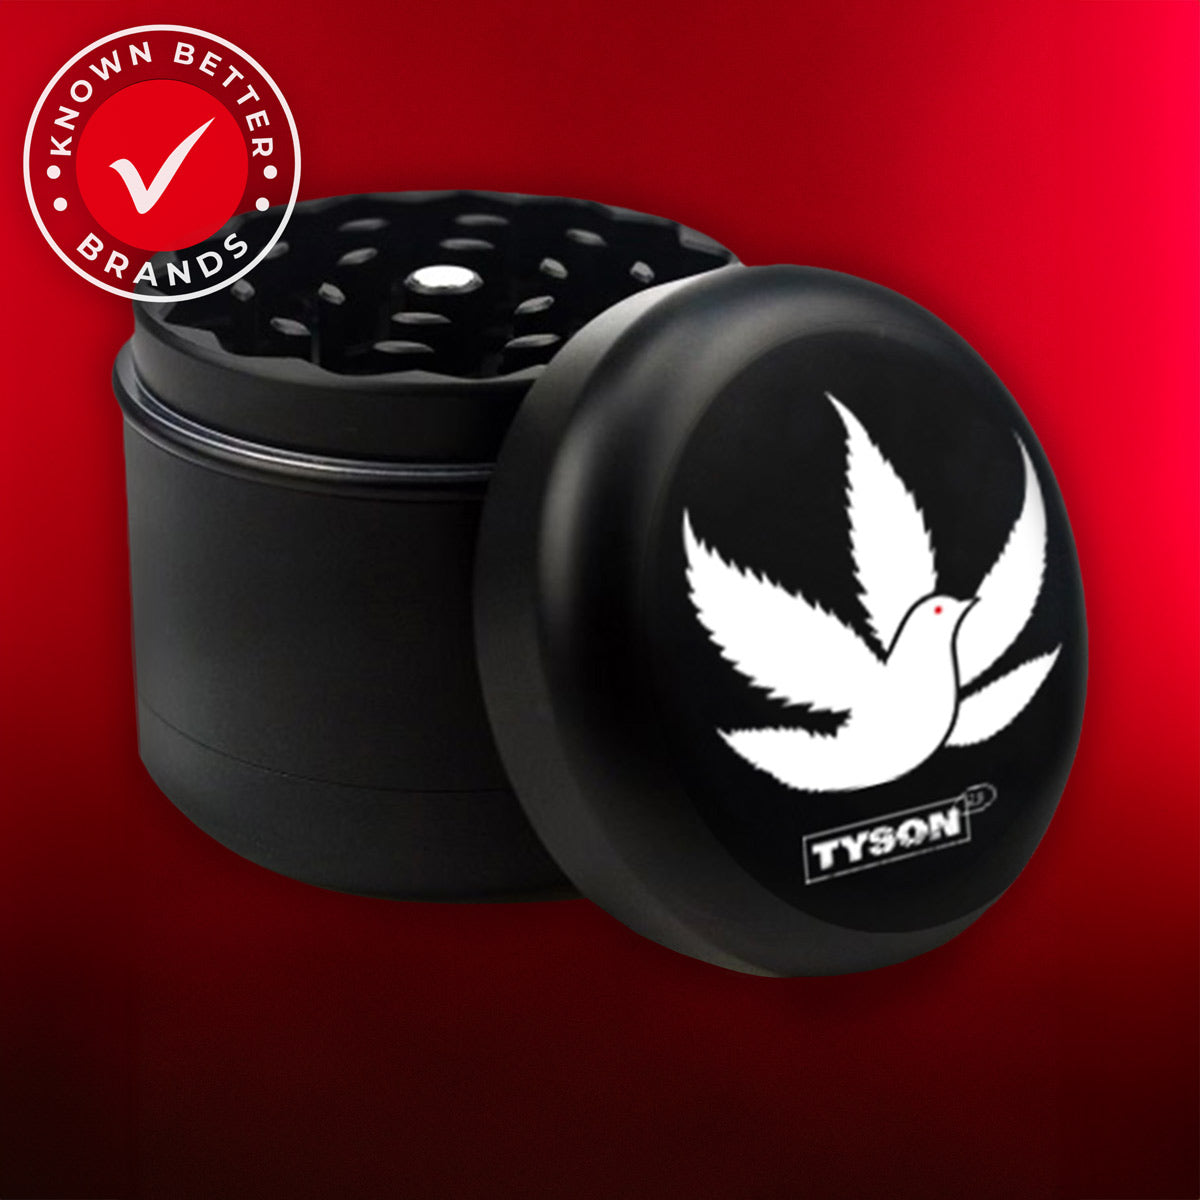 TYSON 2.0 Pigeon 4 Piece Weed Grinder - Black grinder featuring a white bird with wings spread in a weed leaf